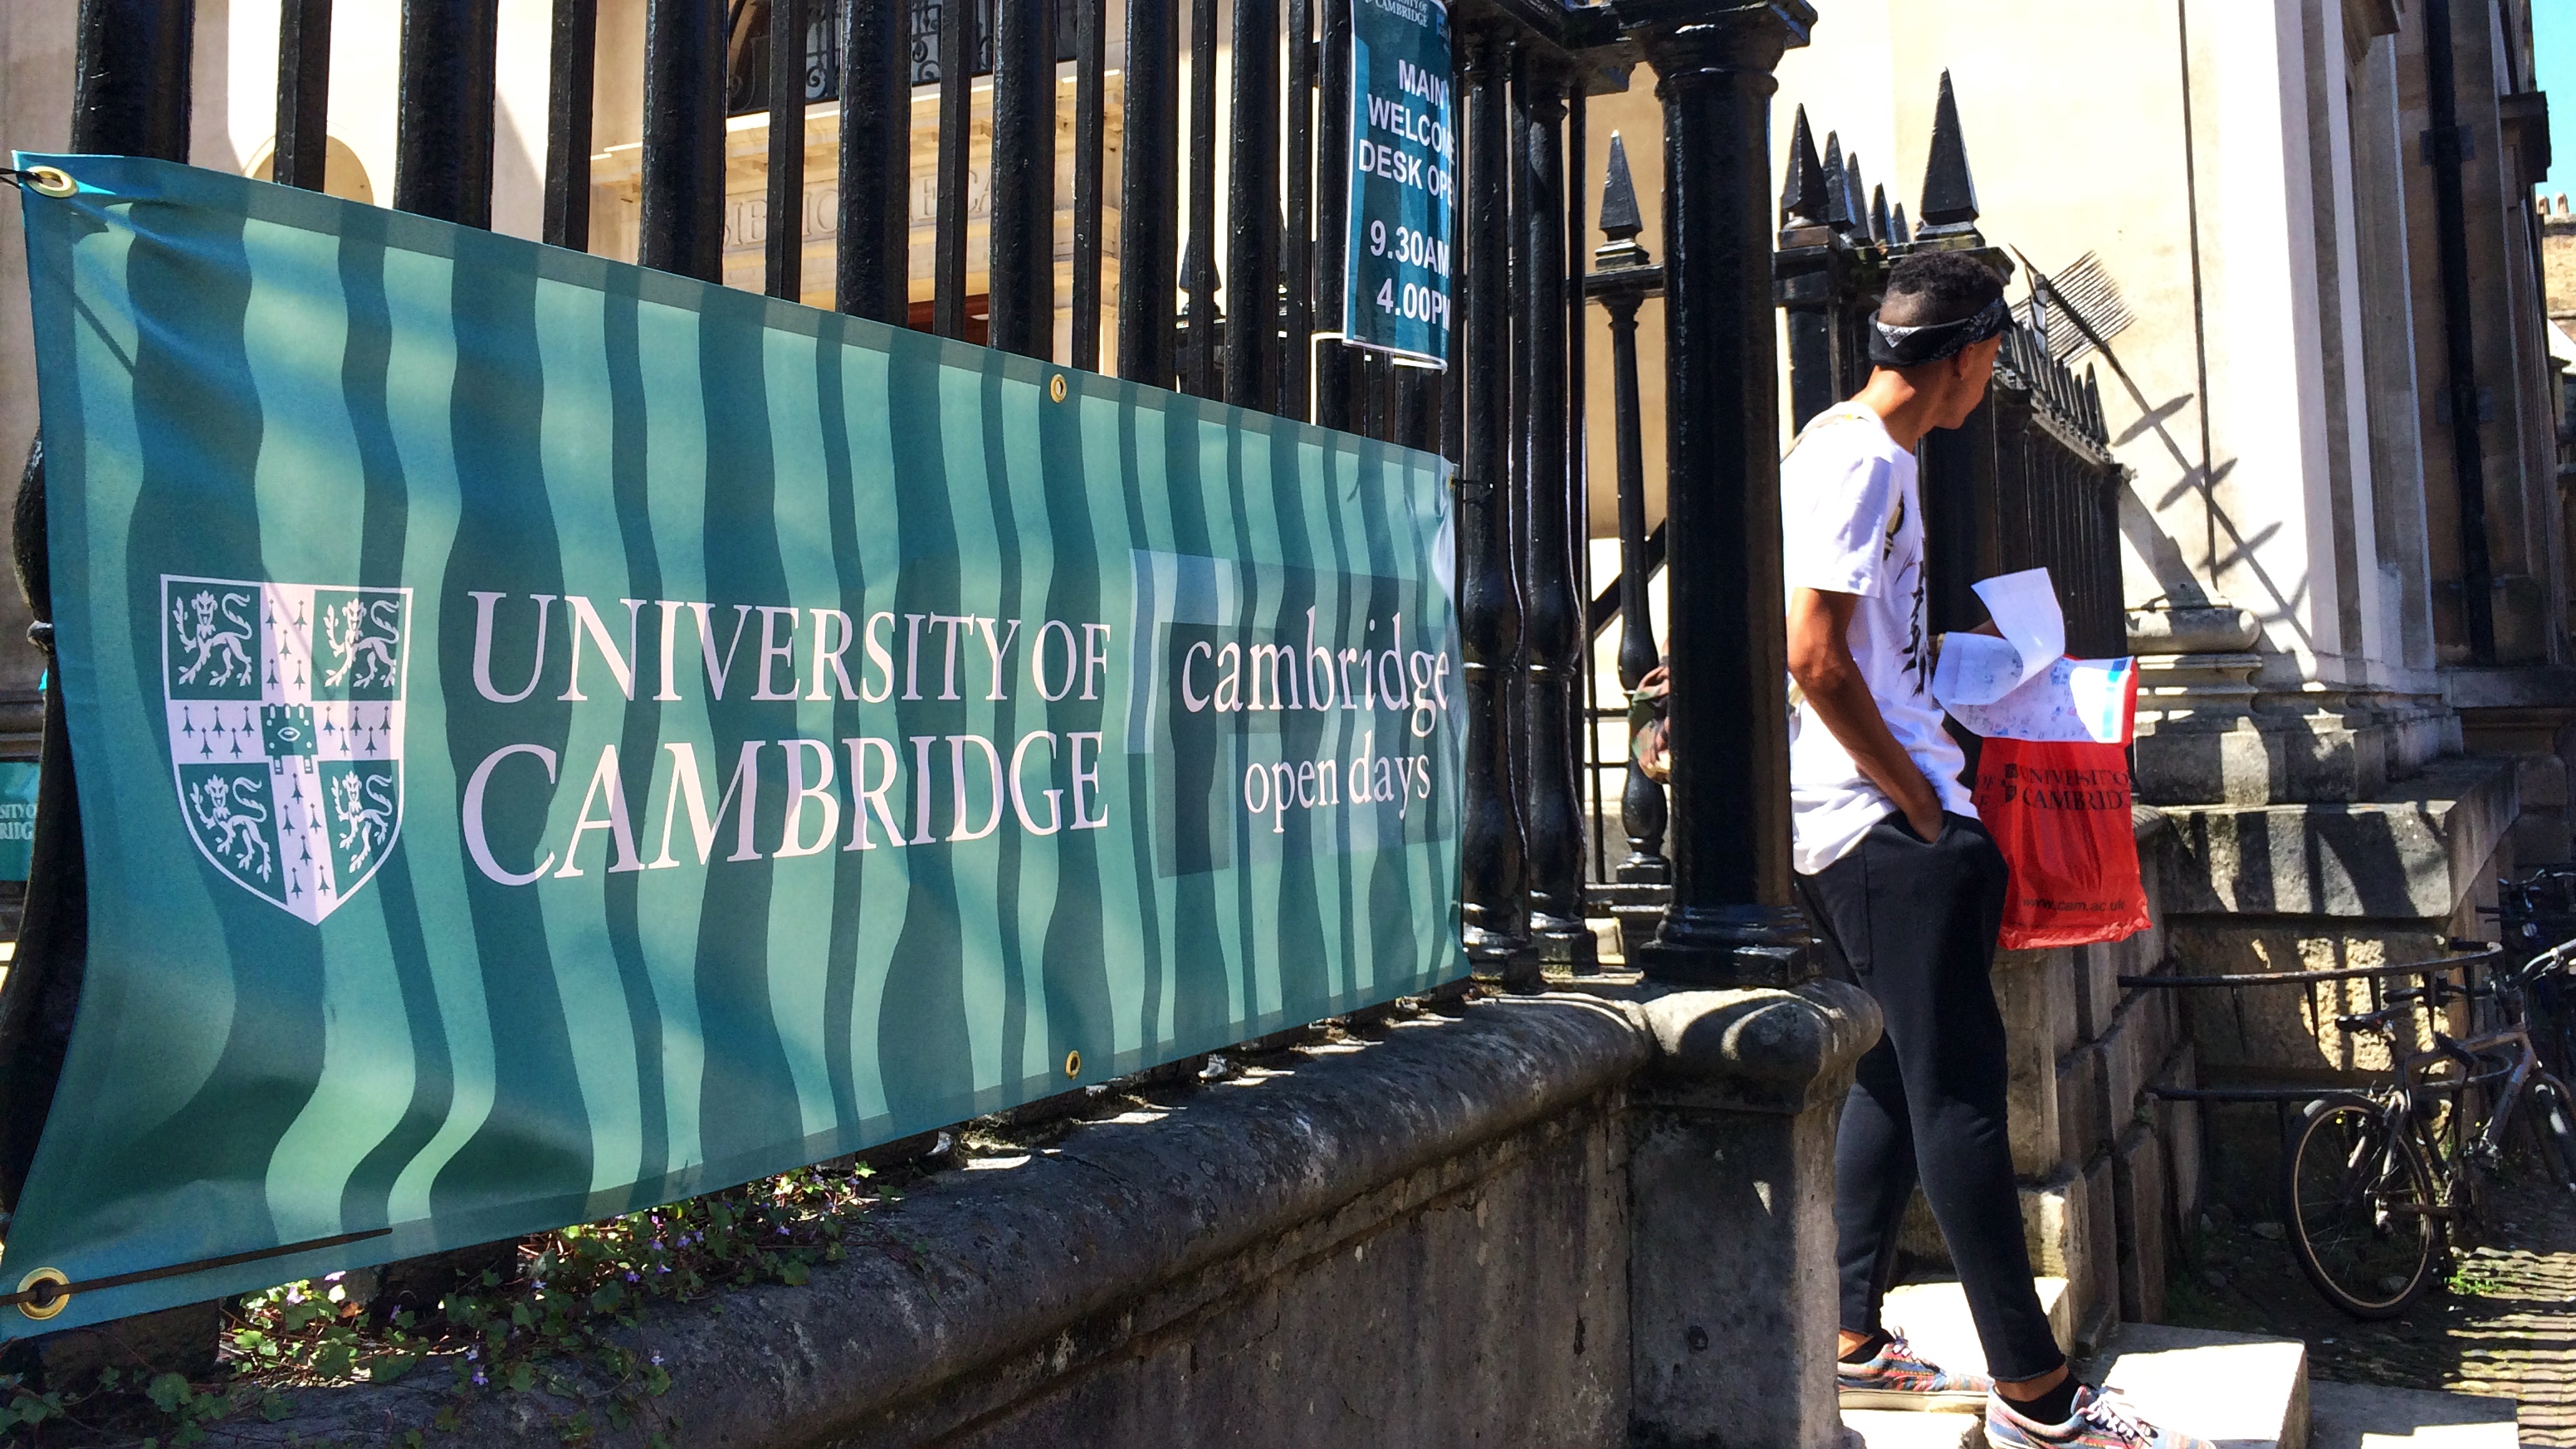 Teal banner reading "University of Cambridge" and "Cambridge open days" attached to metal railings